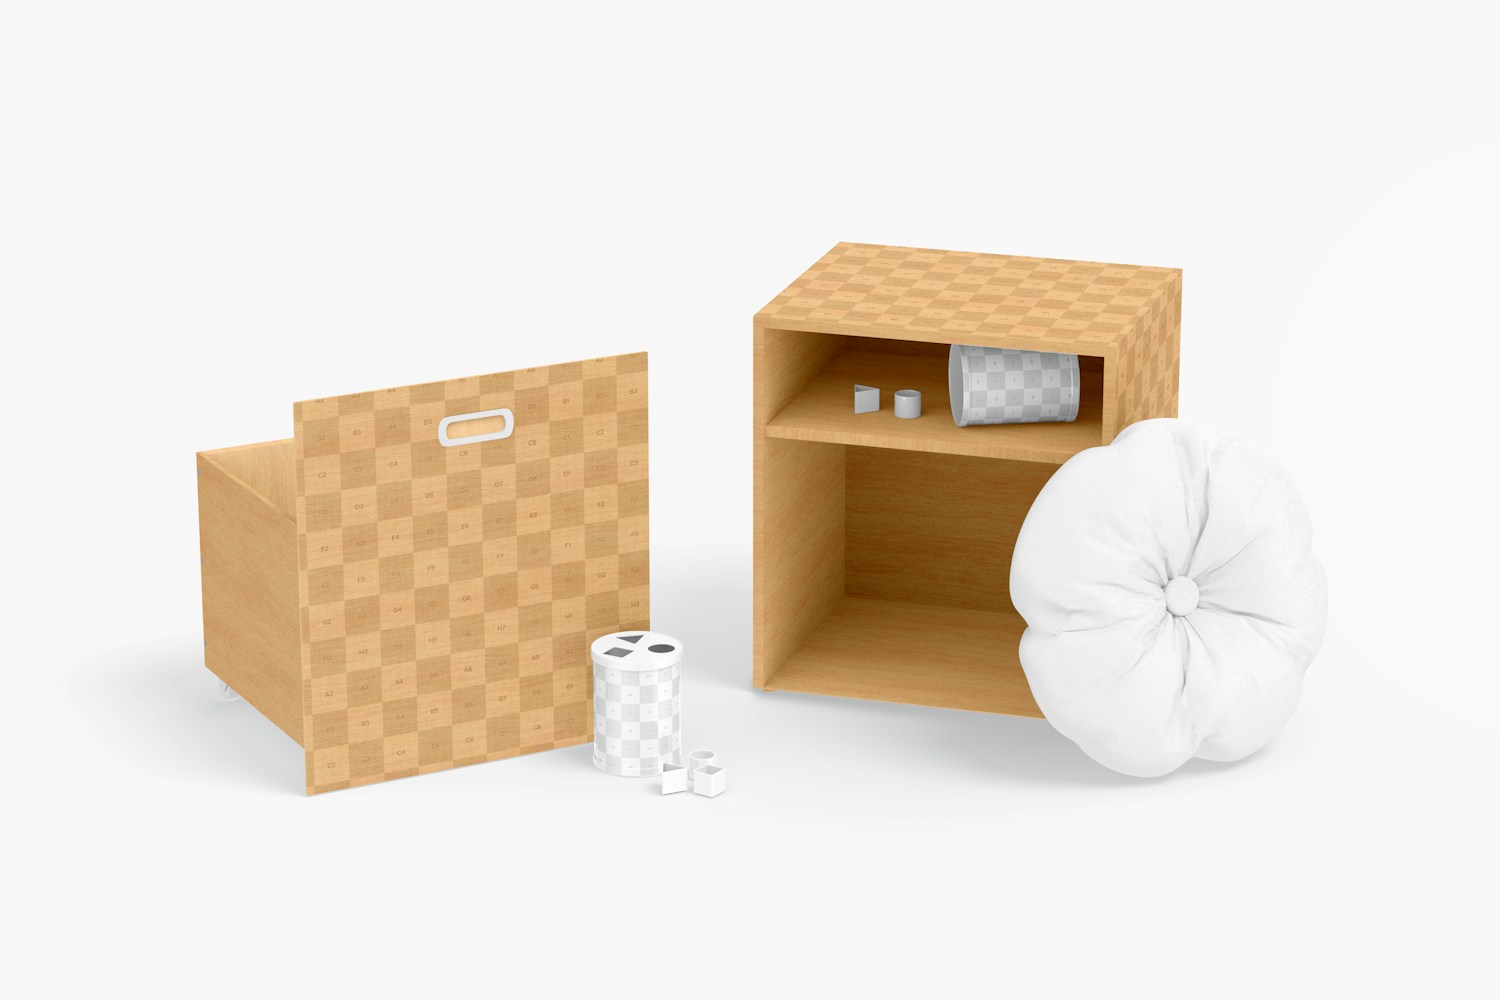 Wooden Toys Containers with Wheels with Pillow Mockup